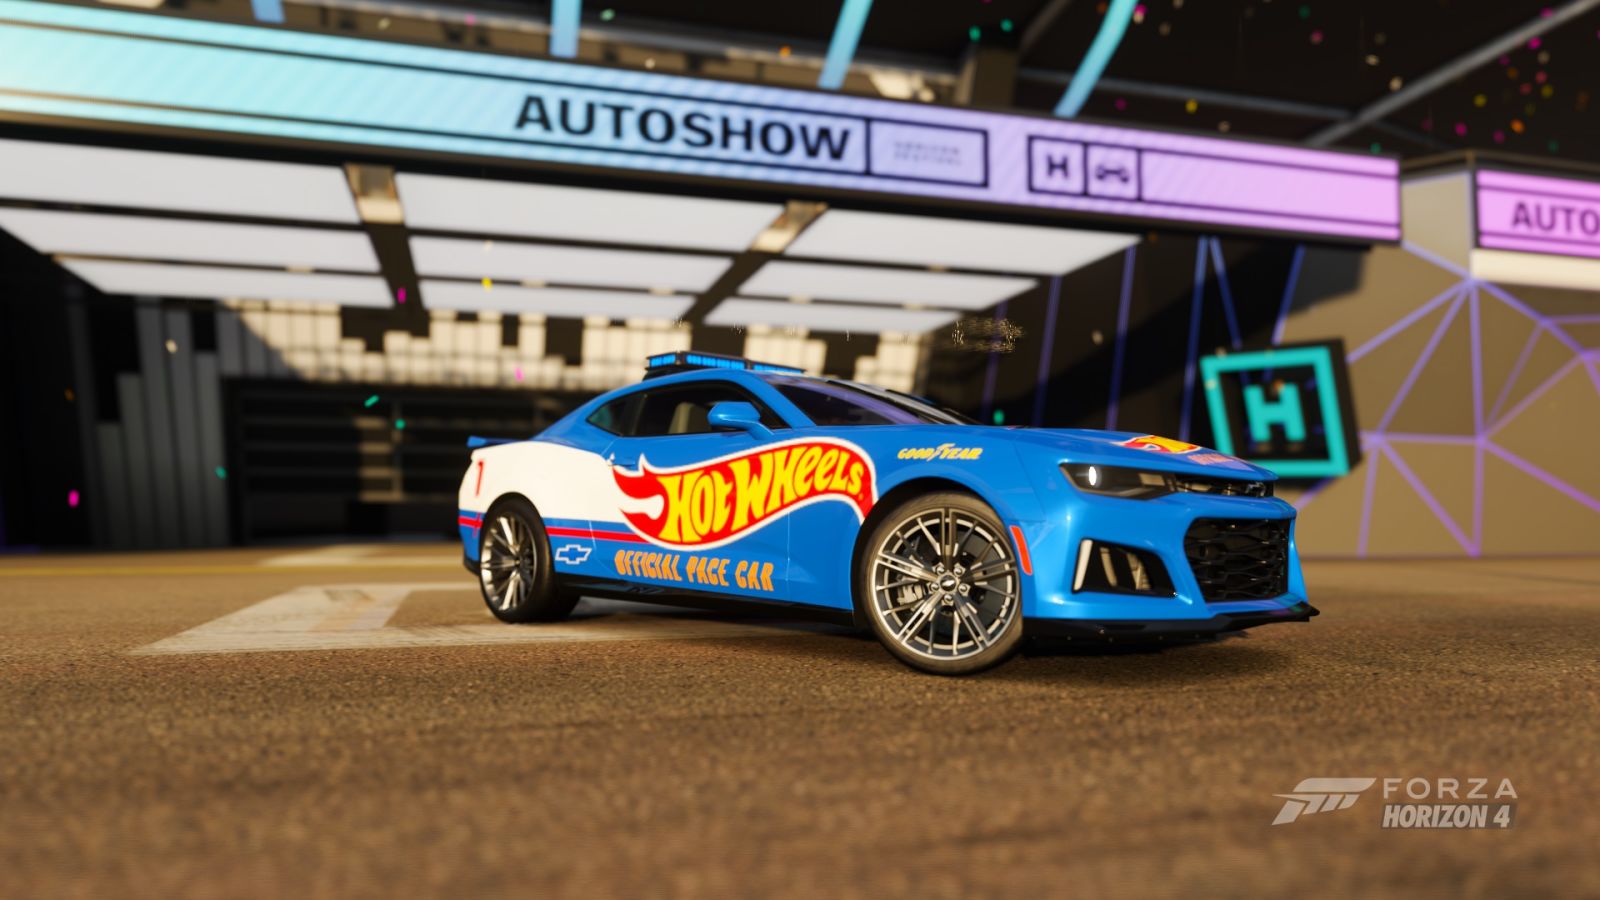 Illustration for article titled Hot Wheels DLC in Horizon 4?